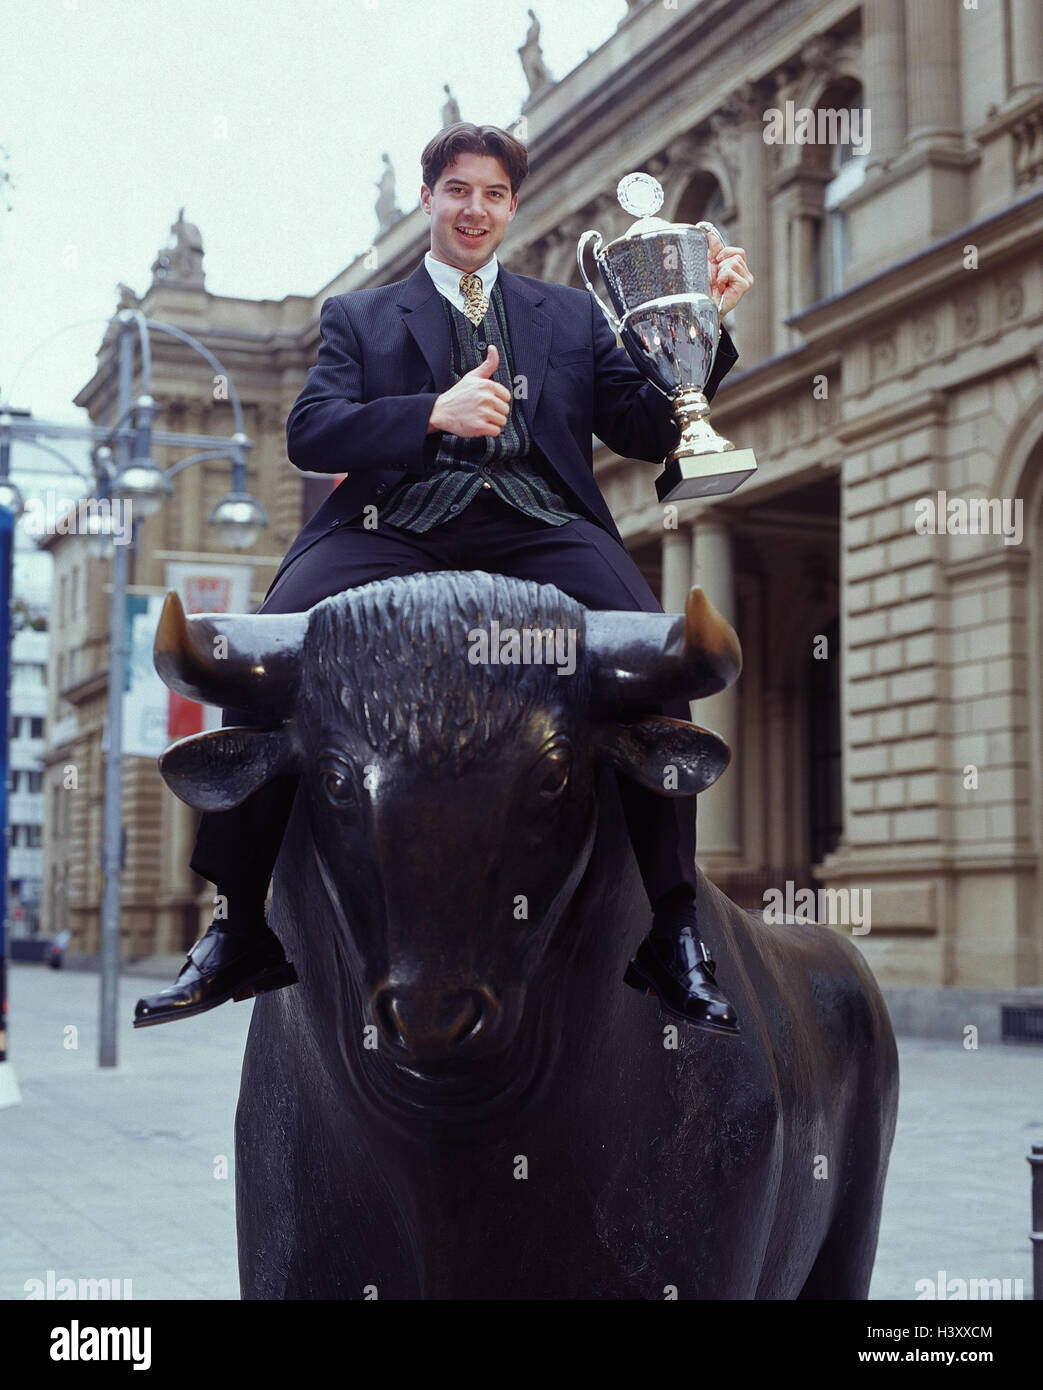 Germany, Frankfurt, stock exchange, sculpture, bull, man, sit, cup, gesture, victory, profit bull and bear, bull market and slump, icon, pollex, high, okay, success, successfully, stocks, stock market, winner's cup Stock Photo